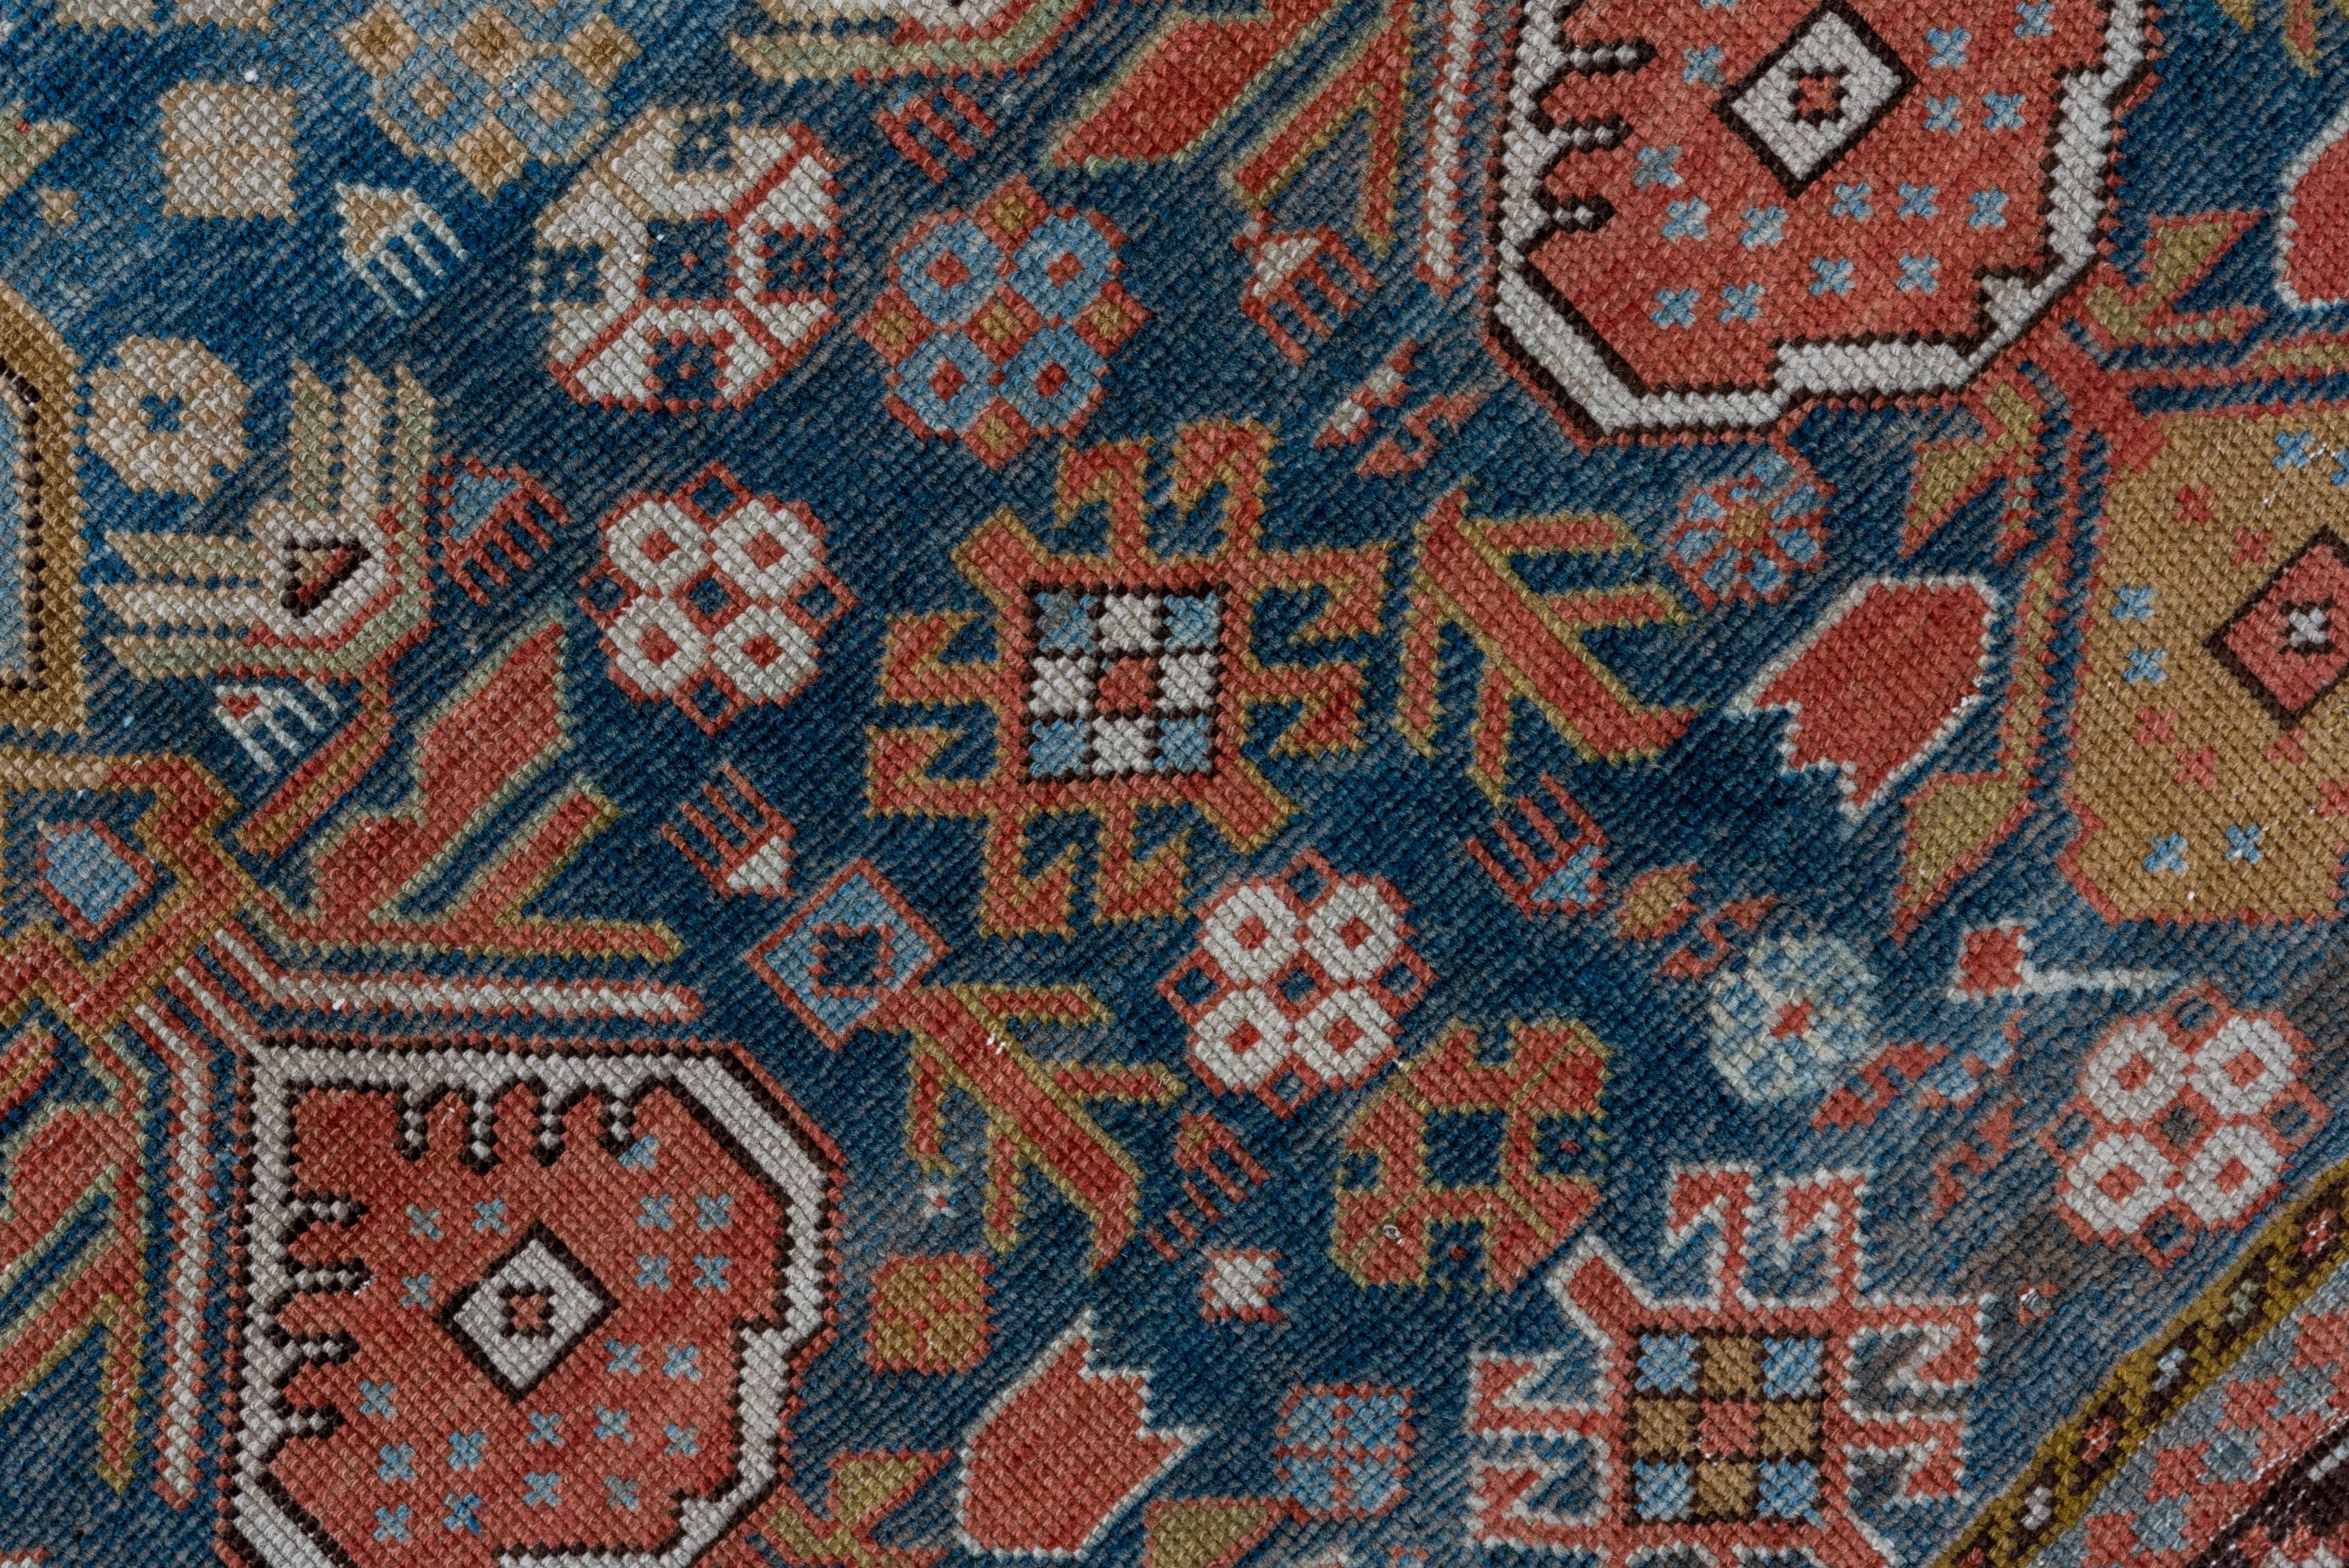 The abrashed slate blue field shows an ascending, one-way, two column pattern of six connected shield palmettes each, in pale blue, coral, rust and ecru. Hooked diamond secondaries. Eggshell border with a tendril and geometric blossoms.